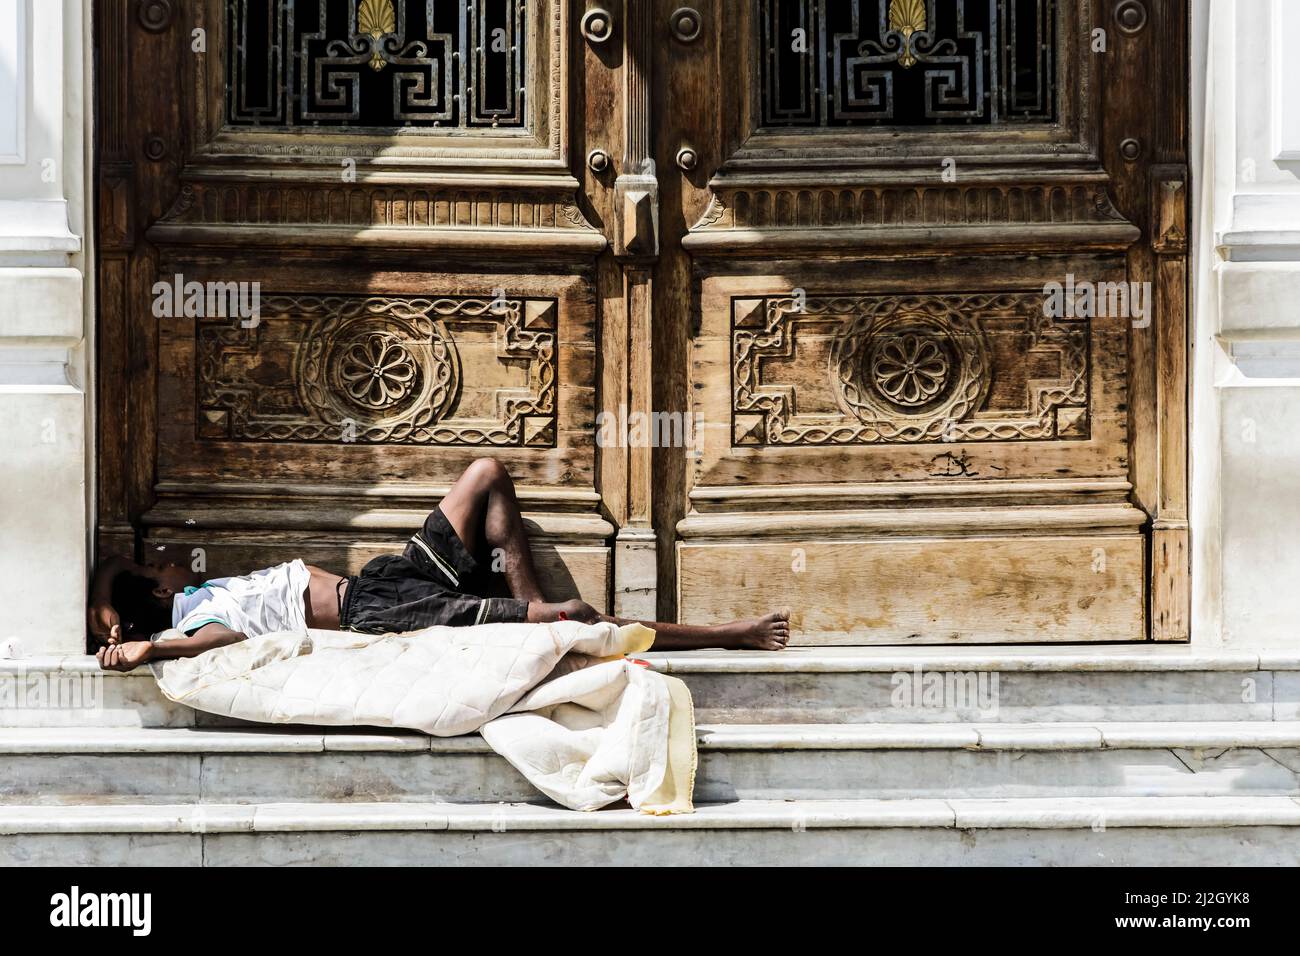 Homeless man sleeping at the door of a historic building in the city of Salvador, capital of Bahia, Brazil Stock Photo